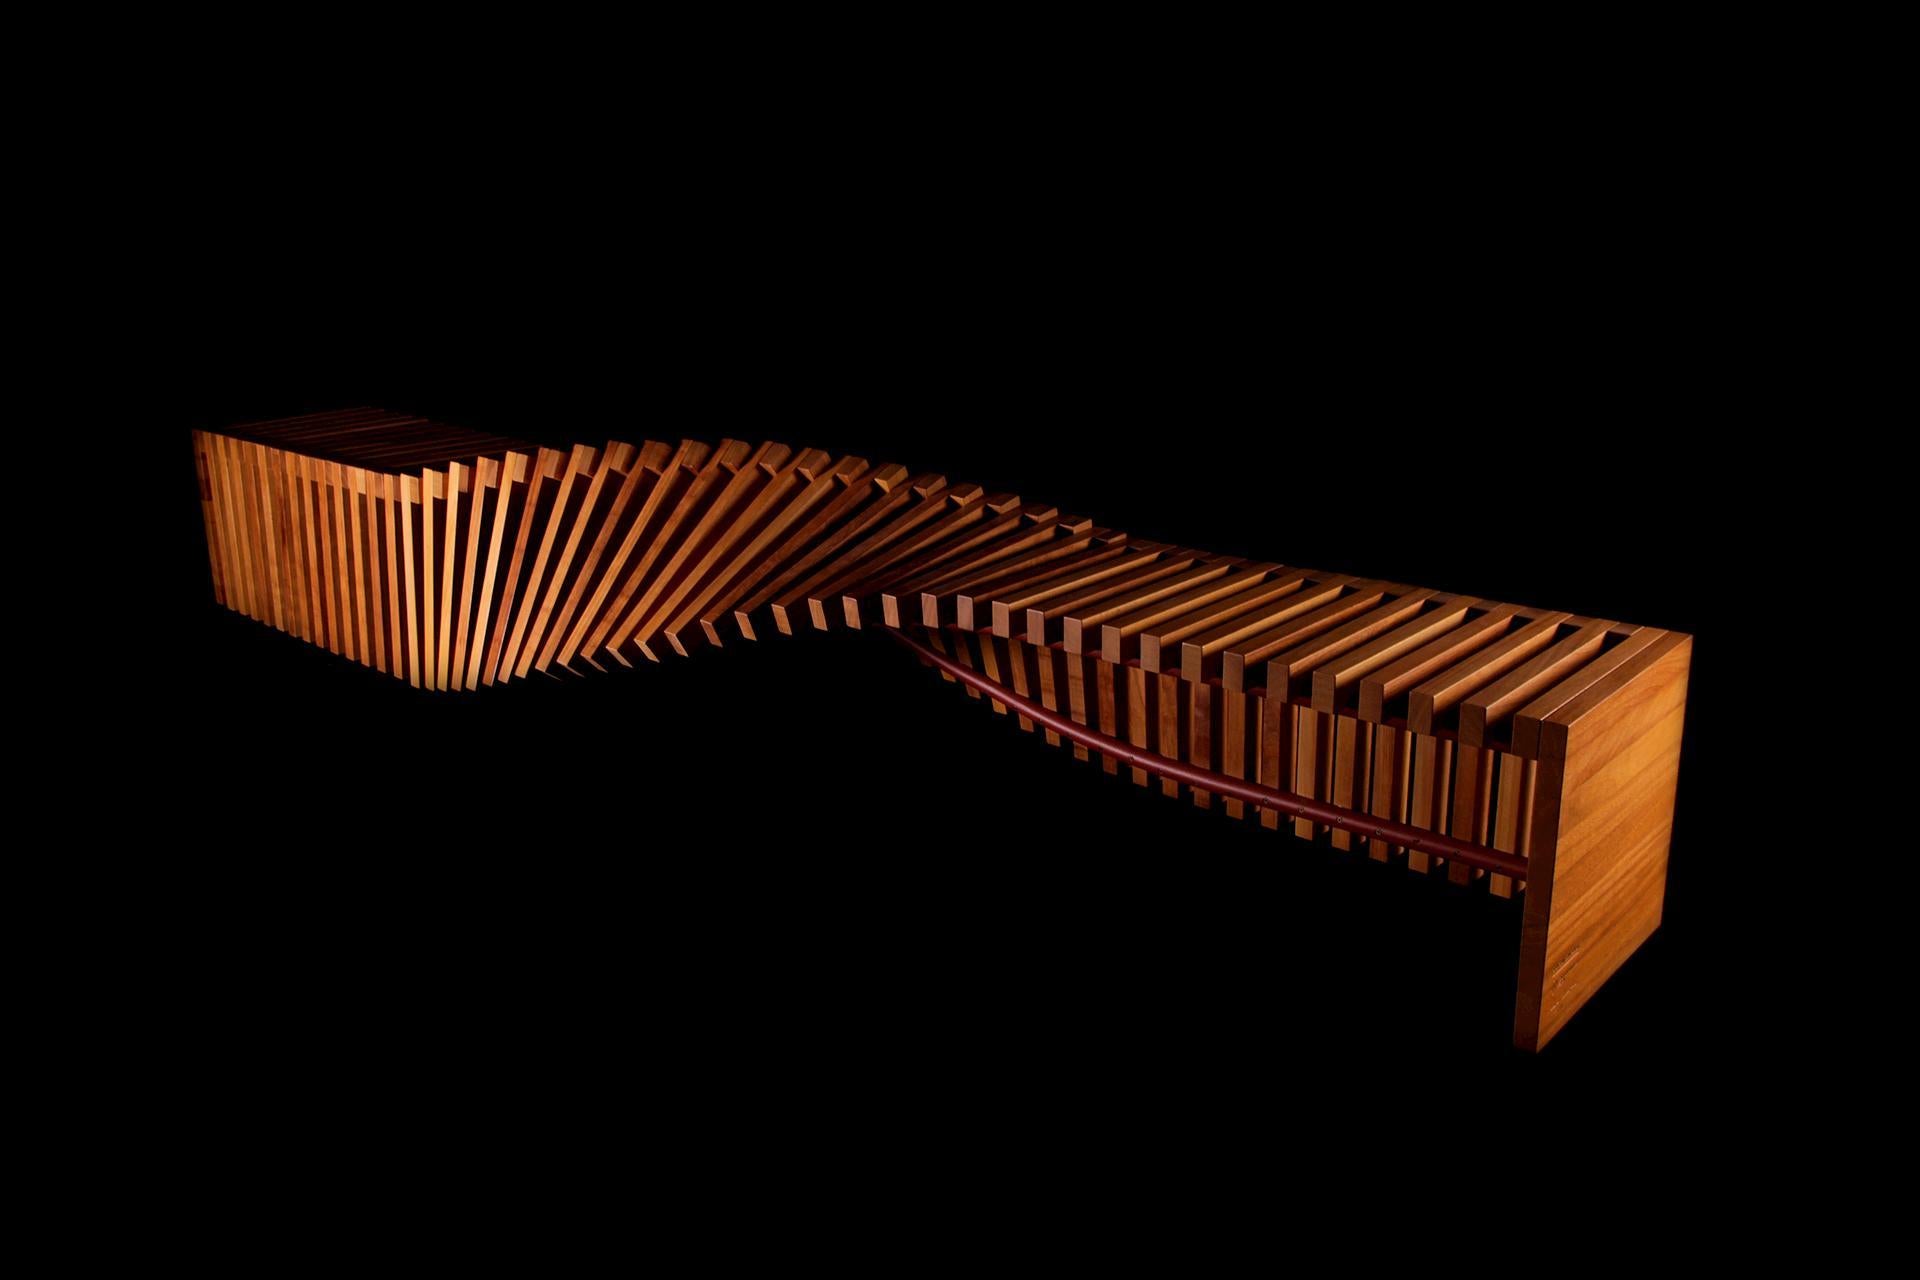 Soul sculpture wood bench large by Veronica Mar
Dimensions: D 300 x W 72 x H 58 cm. SH: 45 cm.
Materials: Iroko Wood

It is available in 2,5 meters & 3 meters long, Made in KRION® in Limited Editions. Different colors in KRION® have different